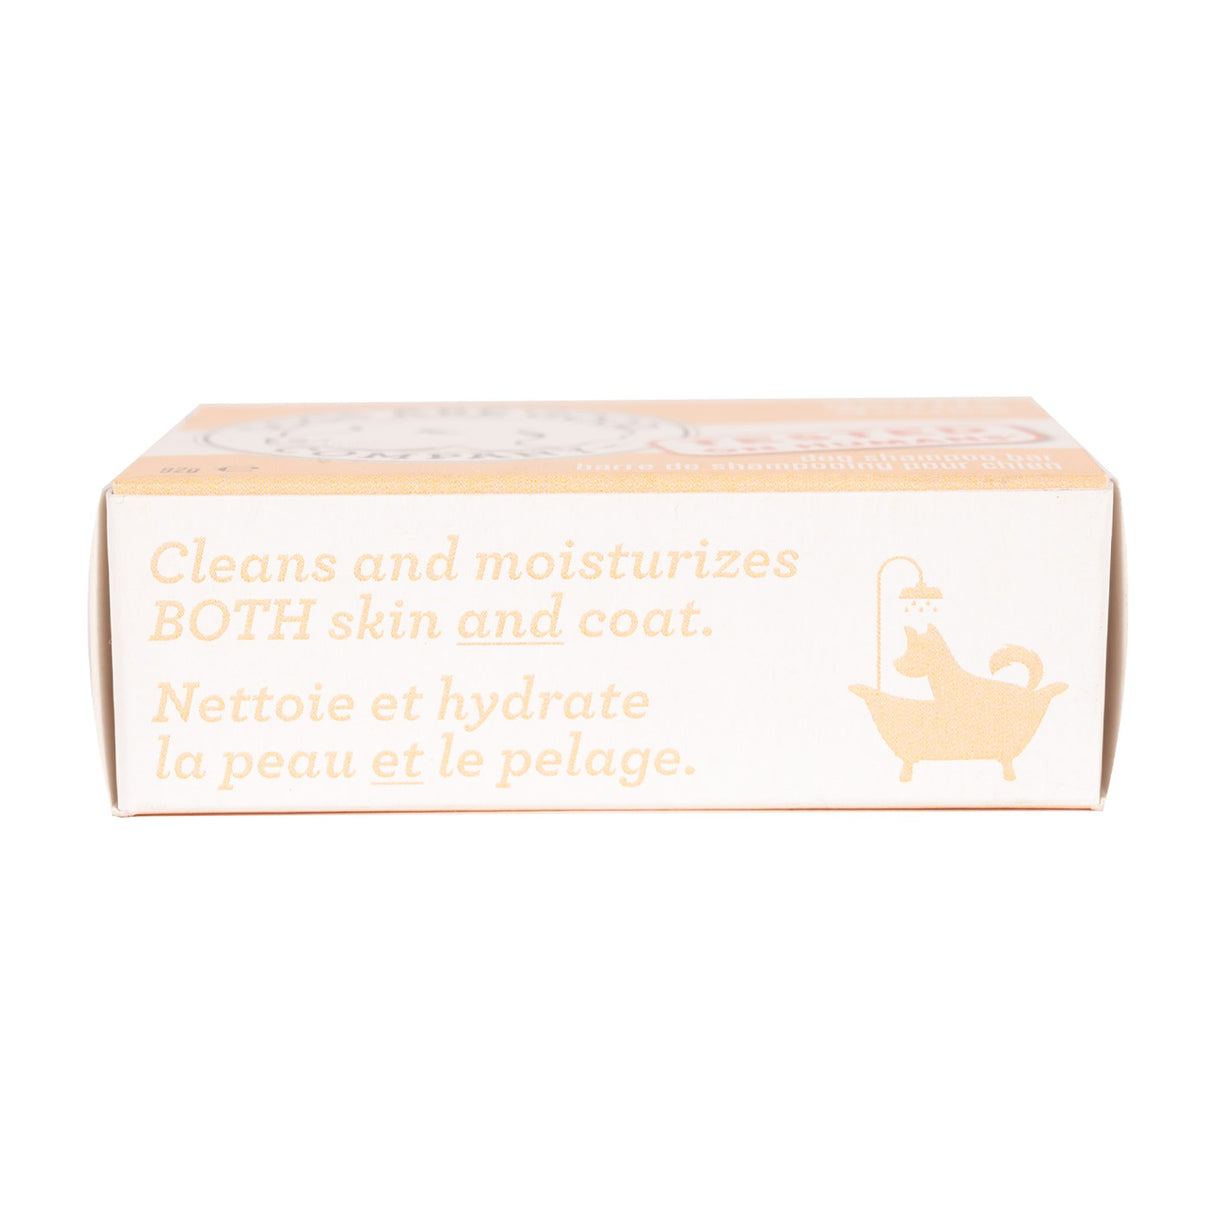 Dogs Are Good Co. Gentle Goat's Milk Shampoo Bar 92 g